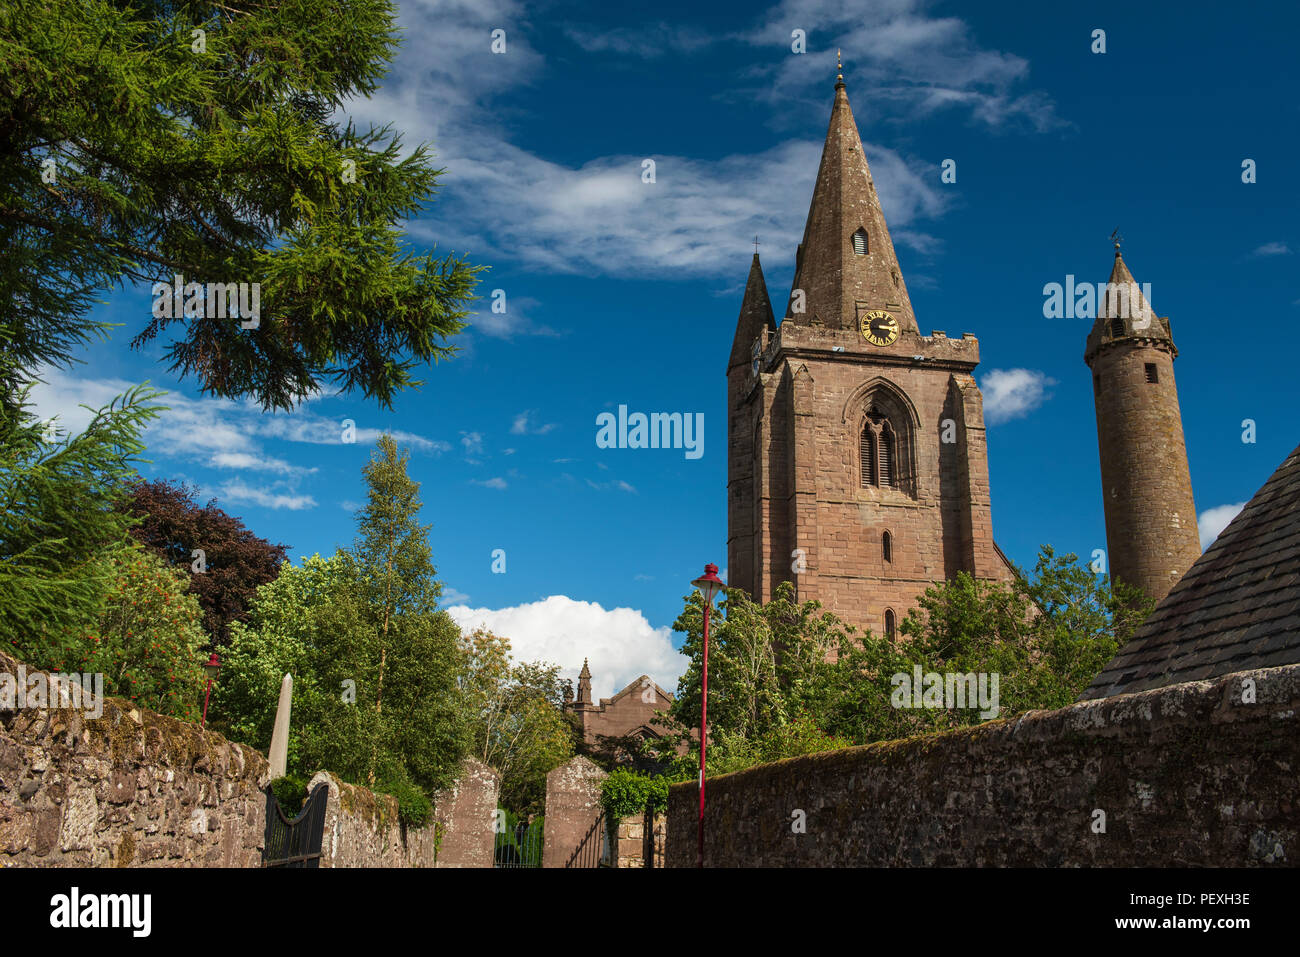 Brechin Cathedral and Brechin Round Tower, Angus, Scotland. Stock Photo